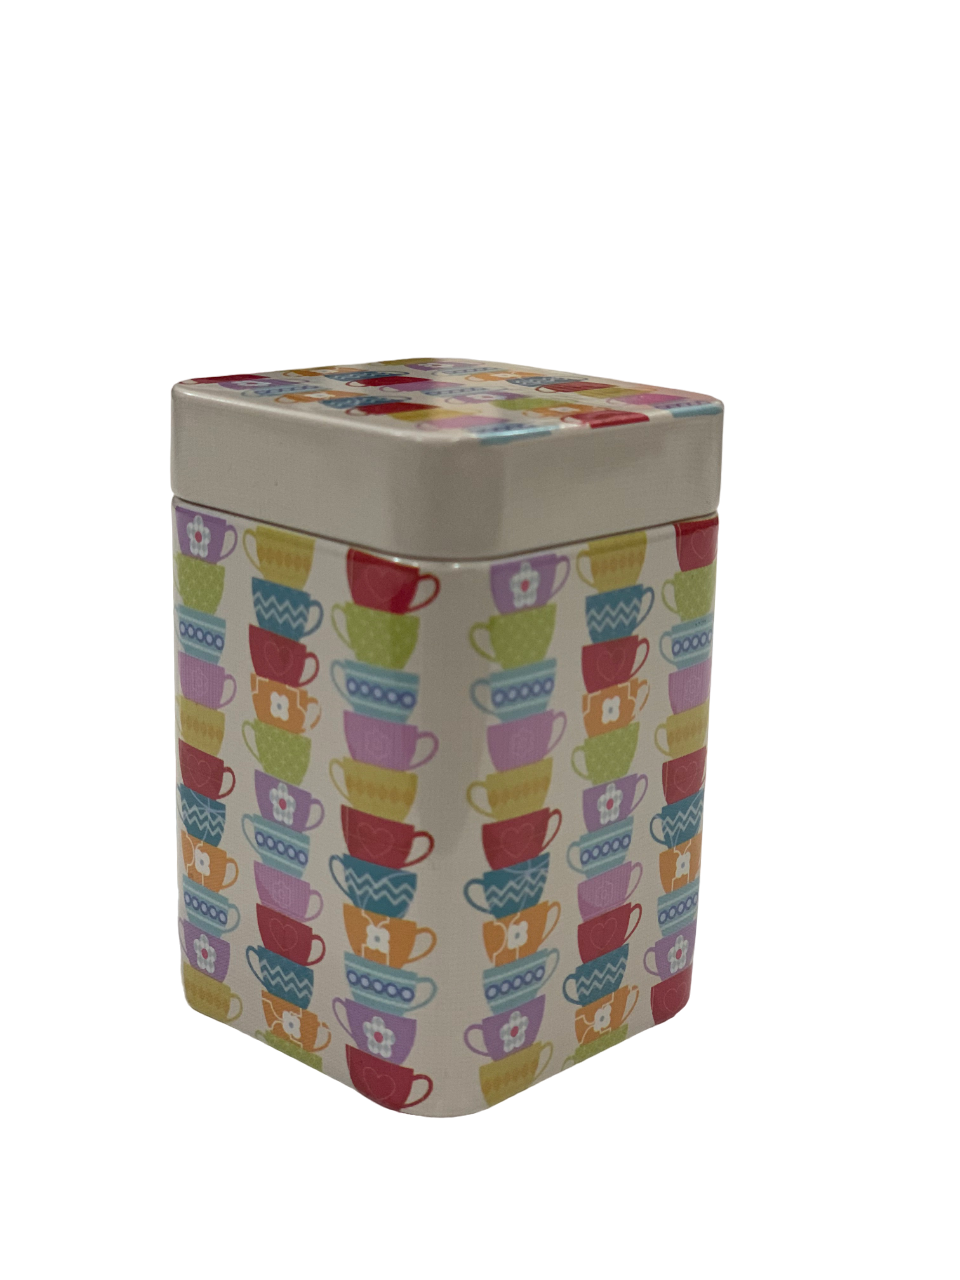 Cream with Cups Design Caddy